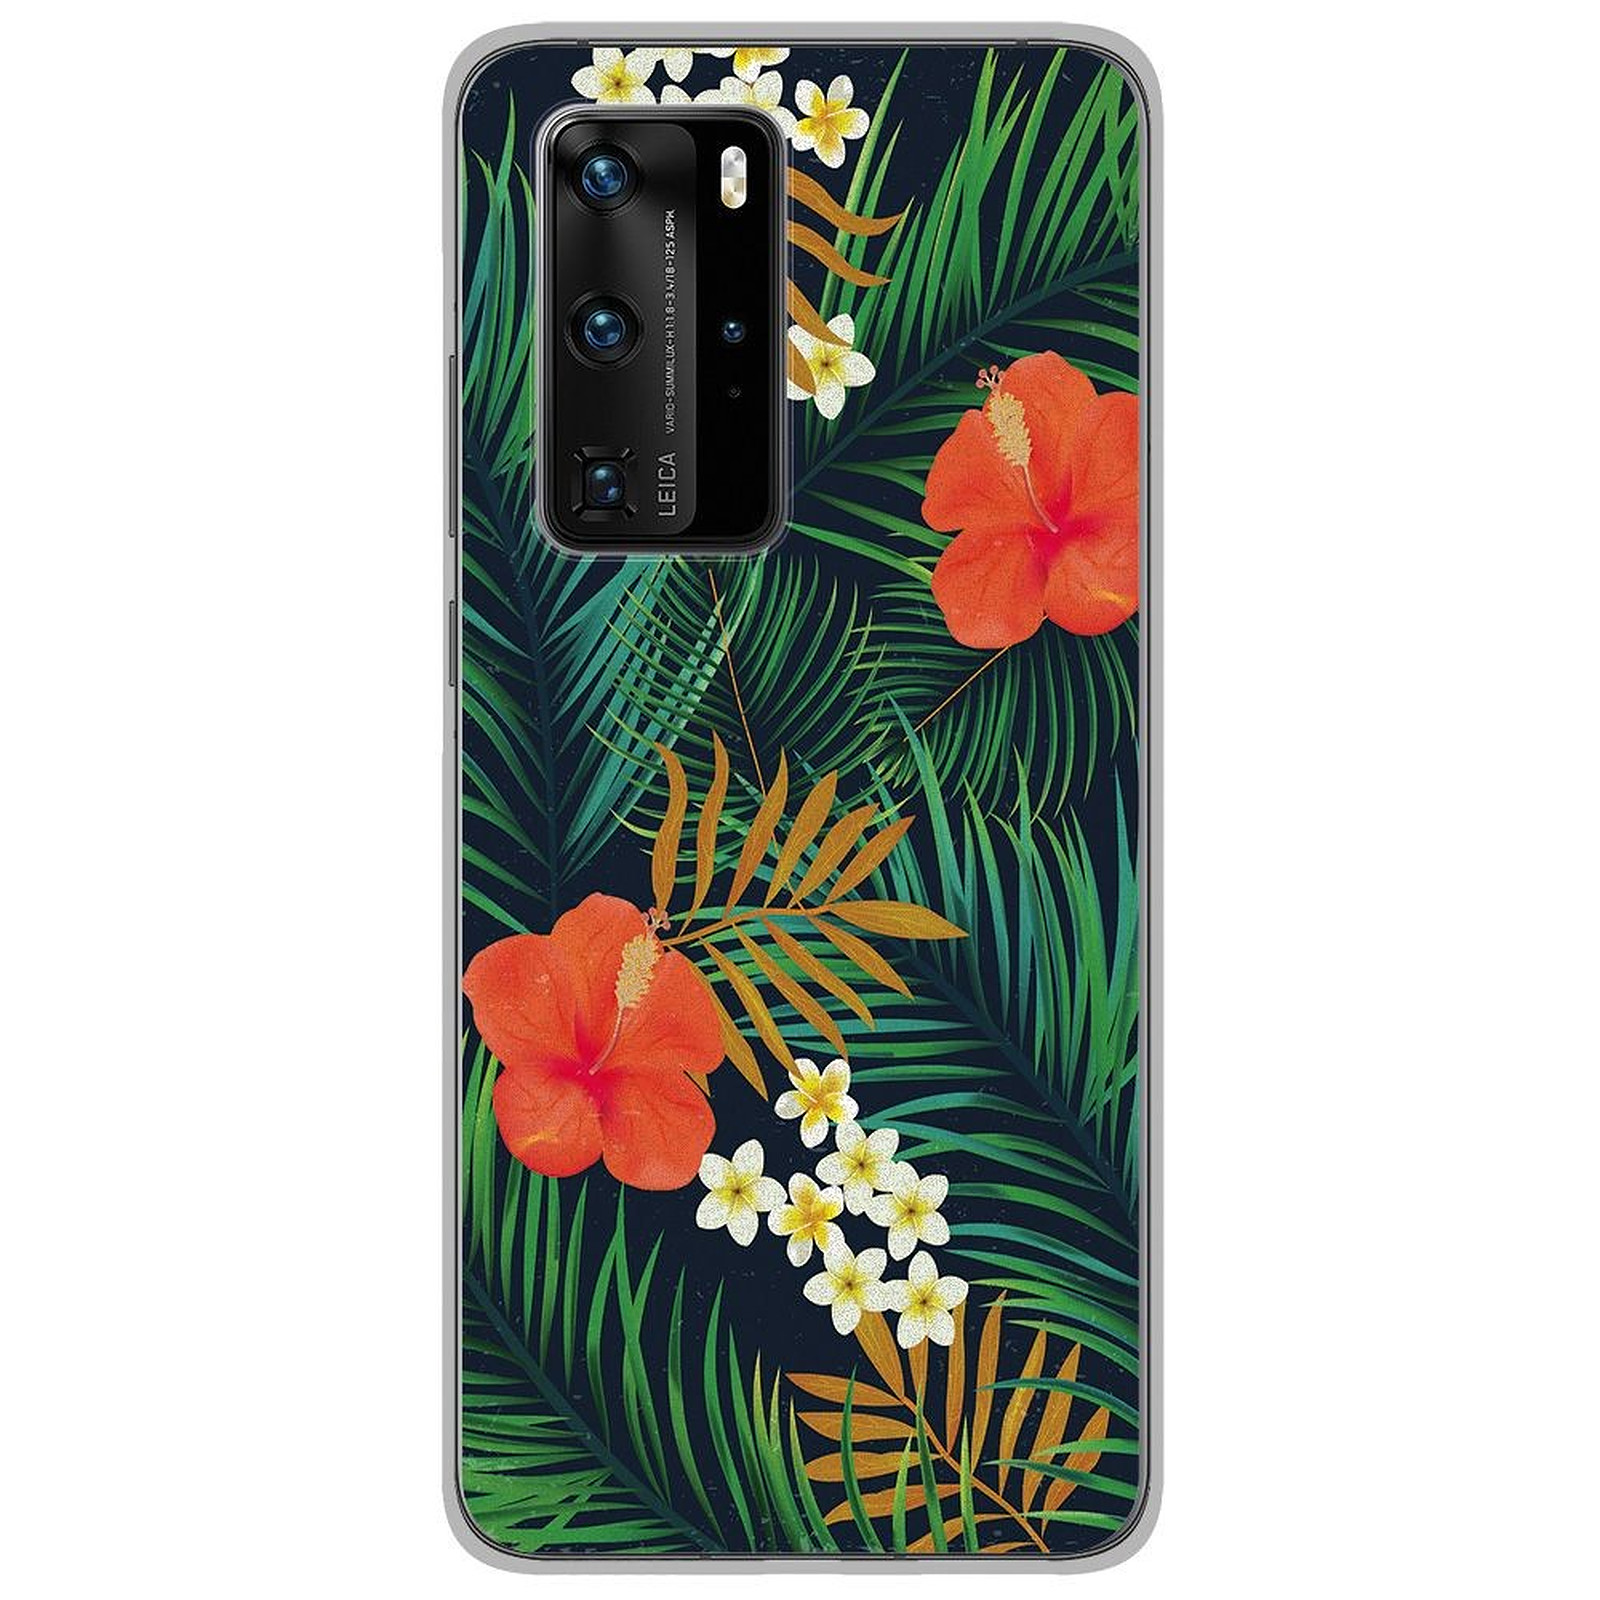 1001 Coques Coque silicone gel Huawei P40 Pro motif Tropical - Coque telephone 1001Coques